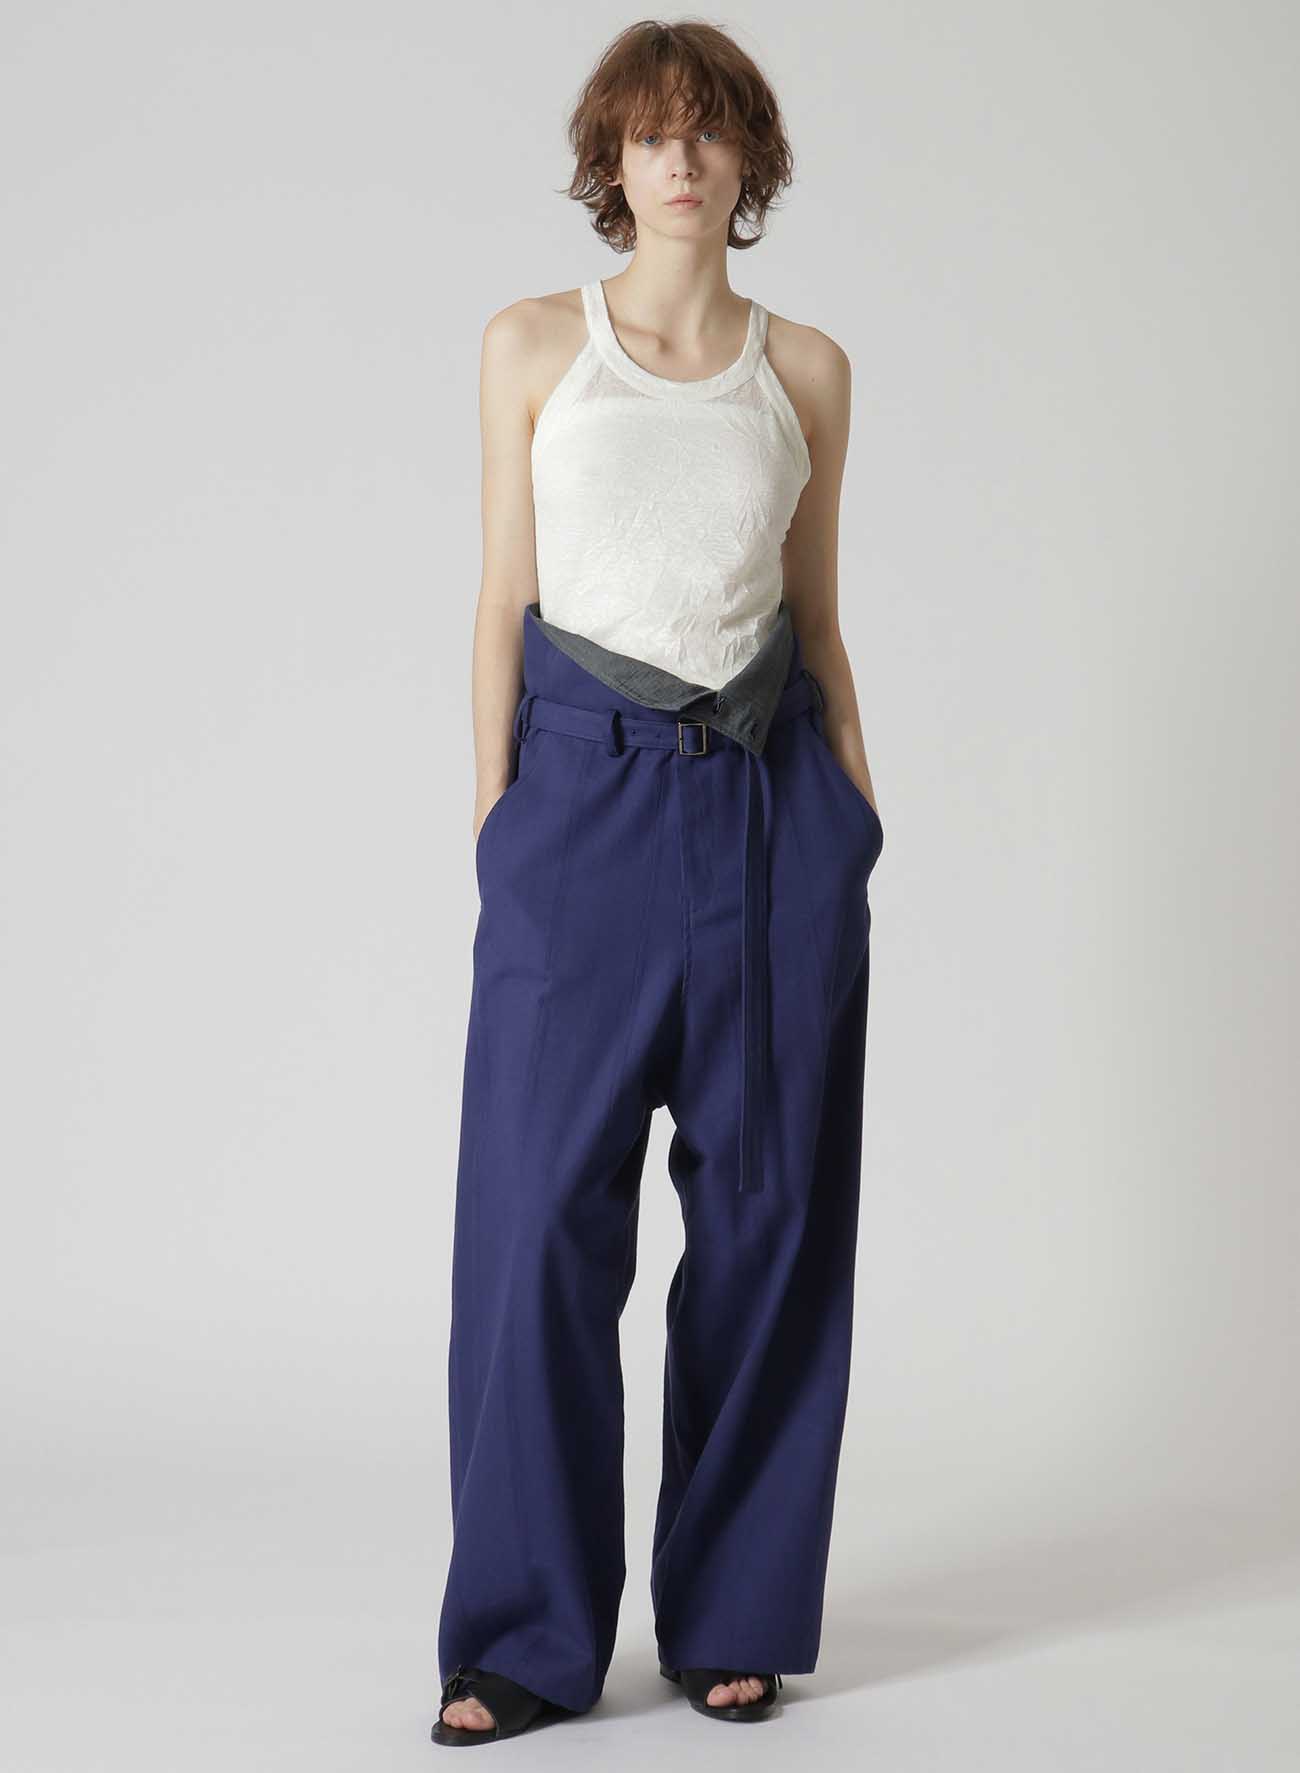 LINEN POLYESTER WRINKLED PLAIN STITCH CAMISOLE